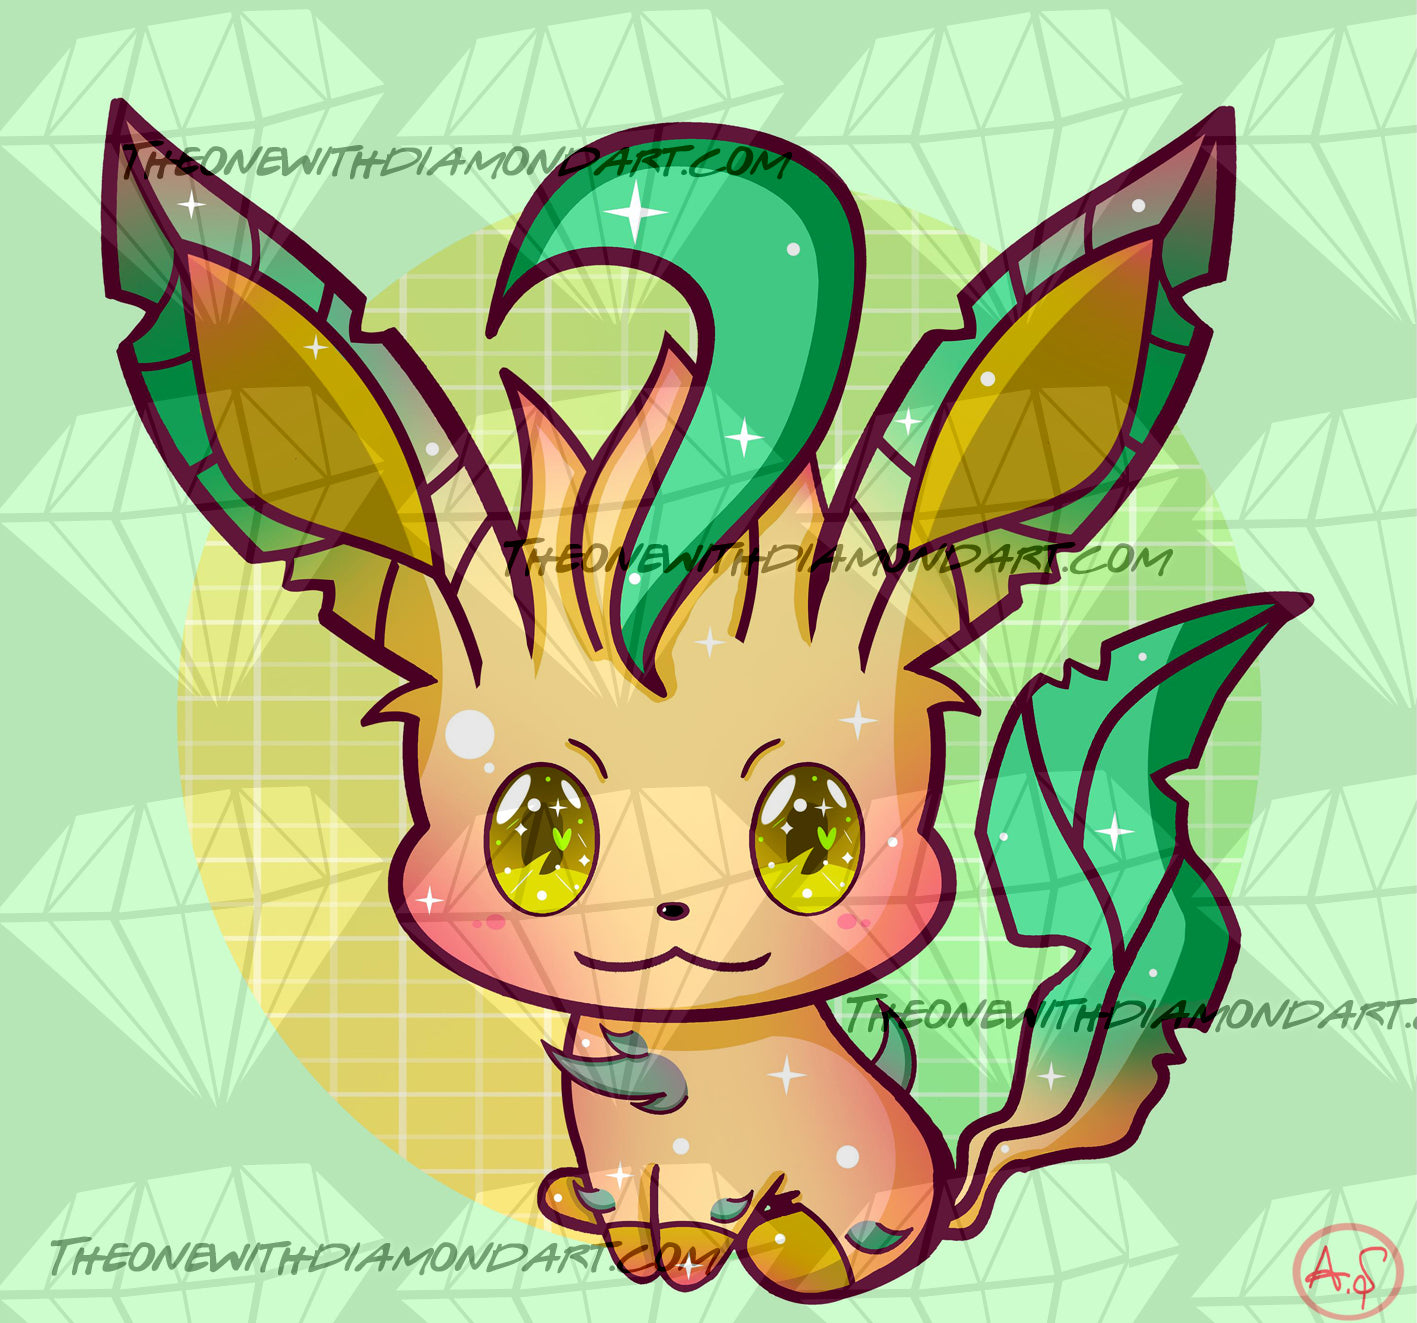 Chibi Flareon ©Aaliyah@CraftieNymphs – The One With The Diamond Art